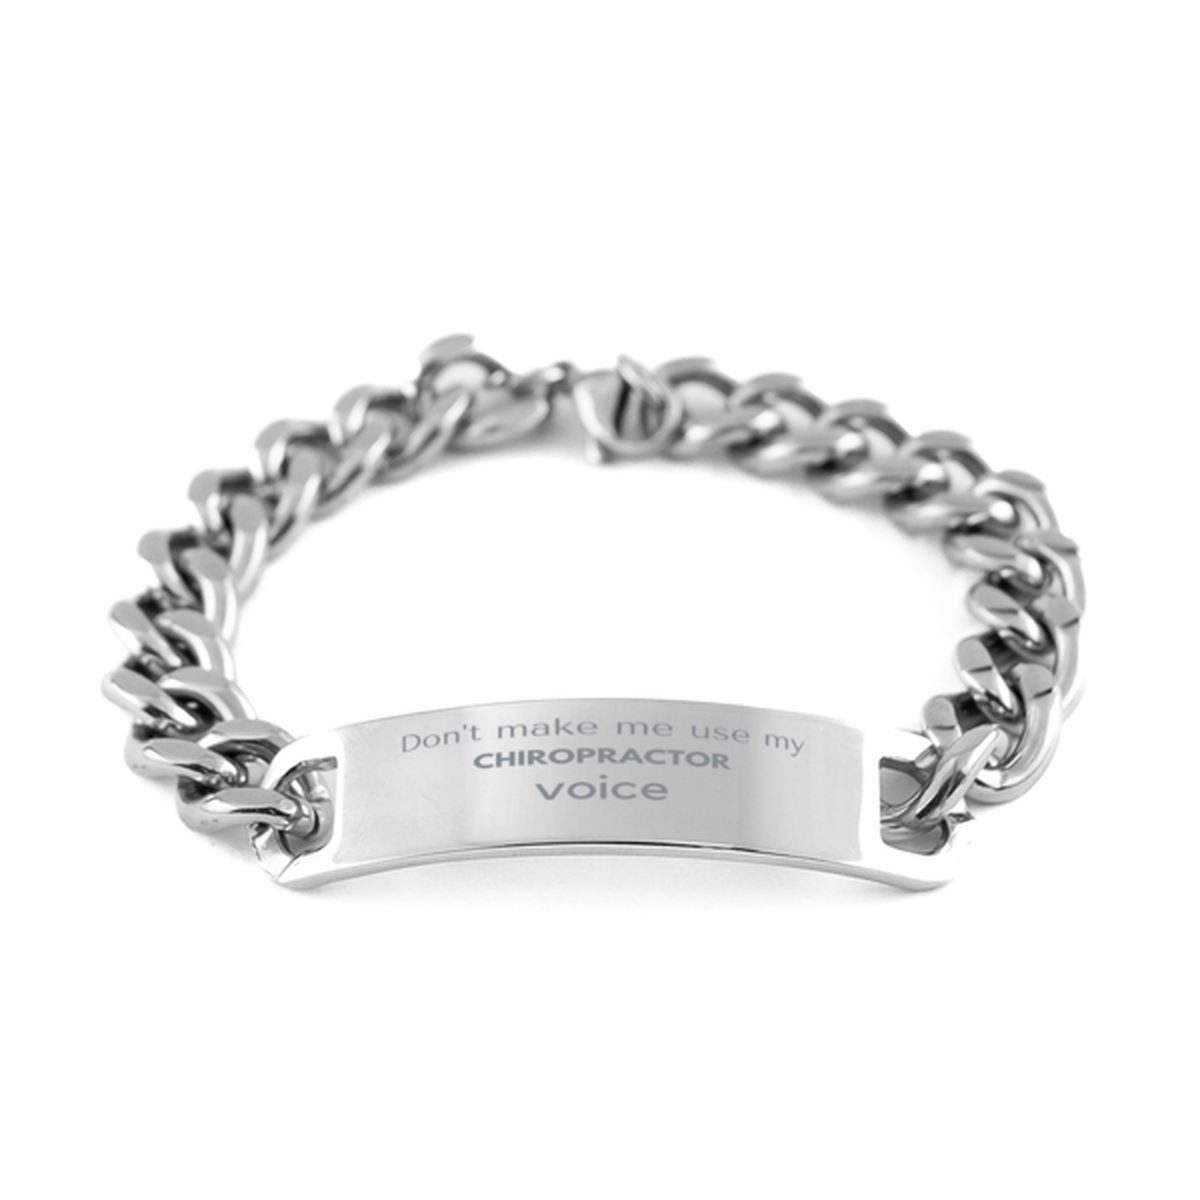 Don't make me use my Chiropractor voice, Sarcasm Chiropractor Gifts, Christmas Chiropractor Cuban Chain Stainless Steel Bracelet Birthday Unique Gifts For Chiropractor Coworkers, Men, Women, Colleague, Friends